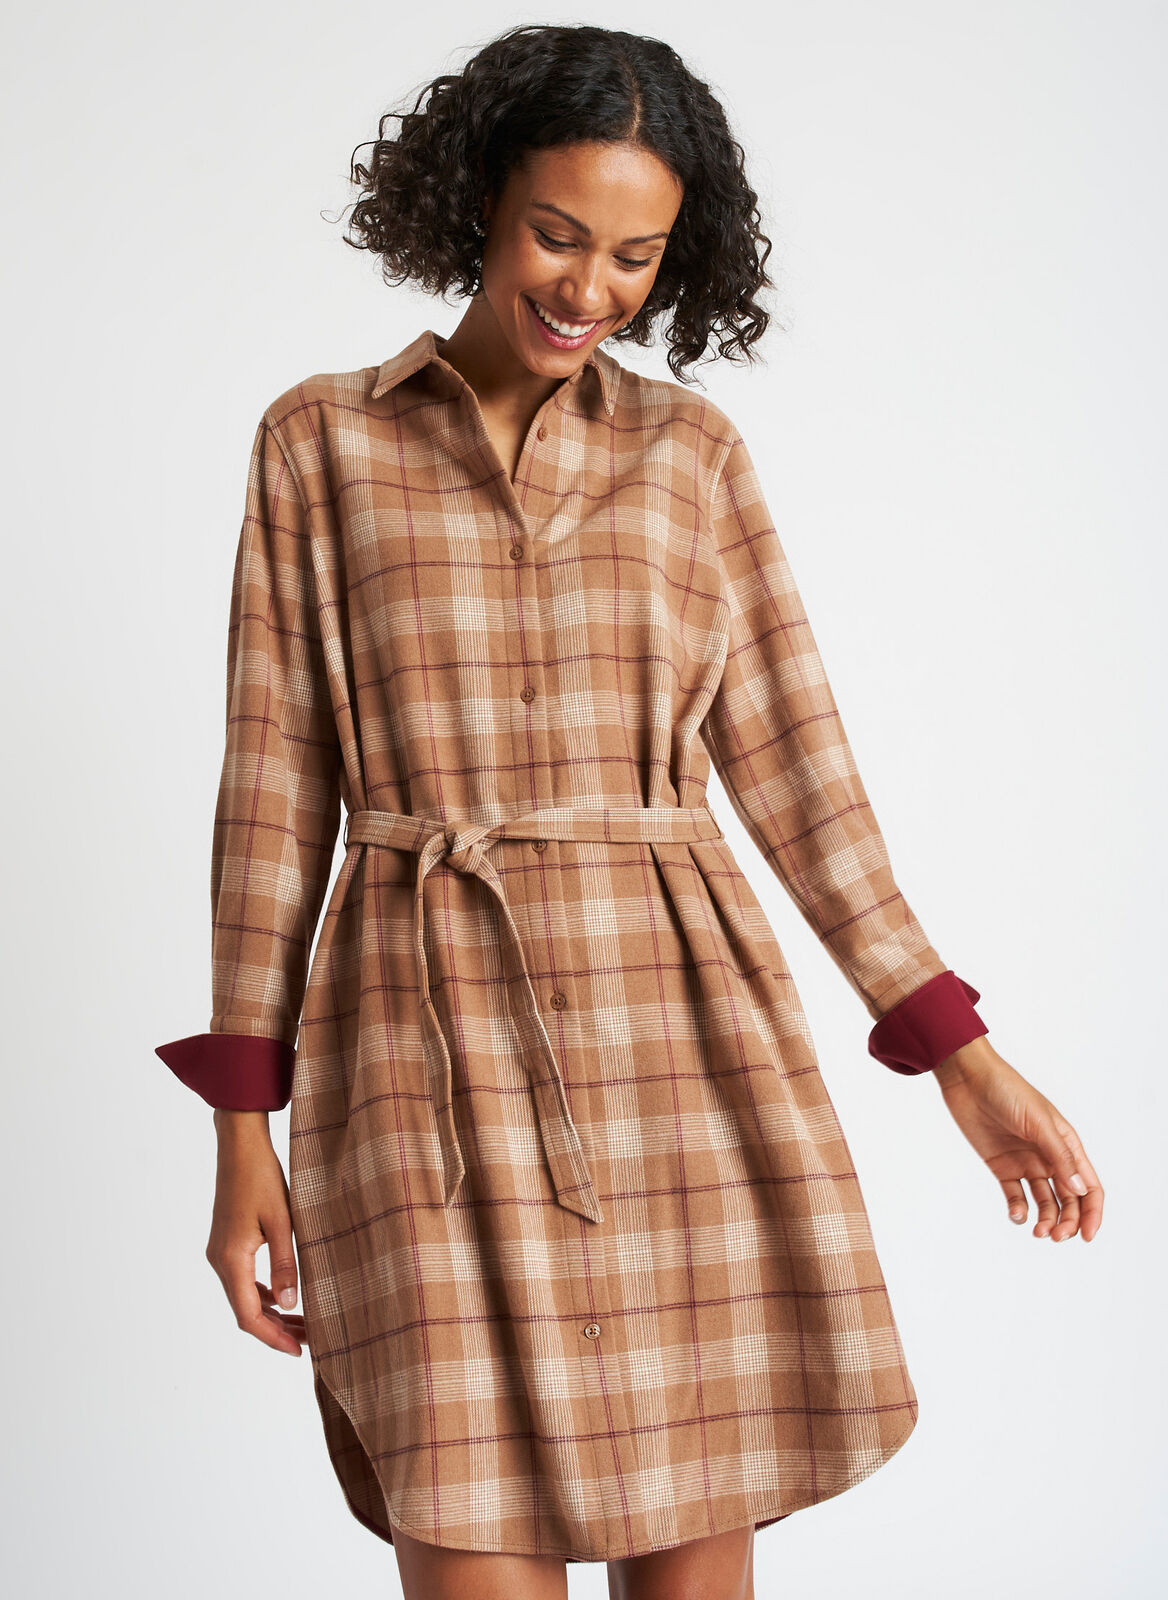 Kit and Ace — Flannel Shirt Dress